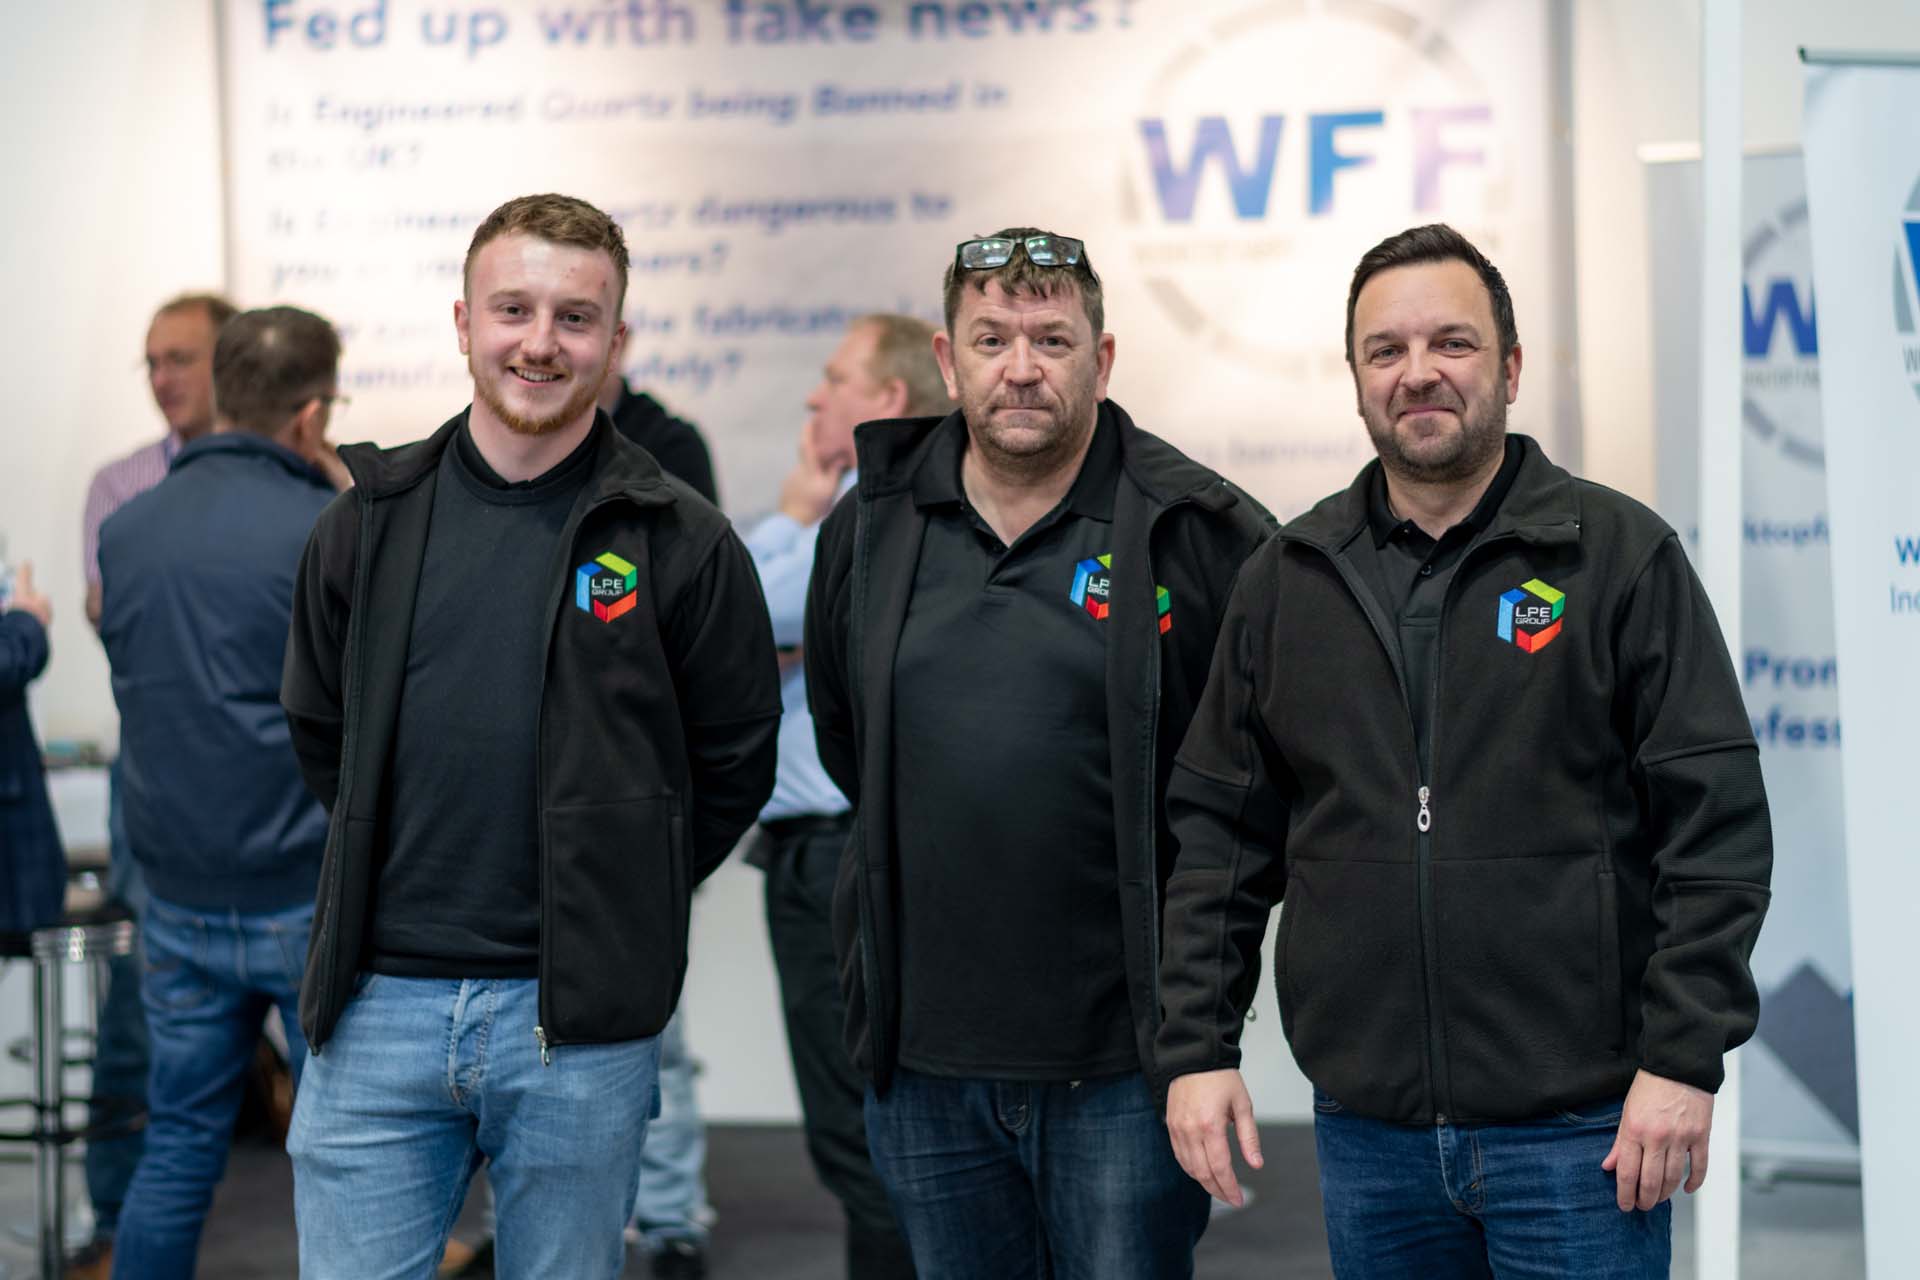 Dan Down, Dean Bell and Carl Starkey, three of the team from LPE Group, sponsors of the WFF